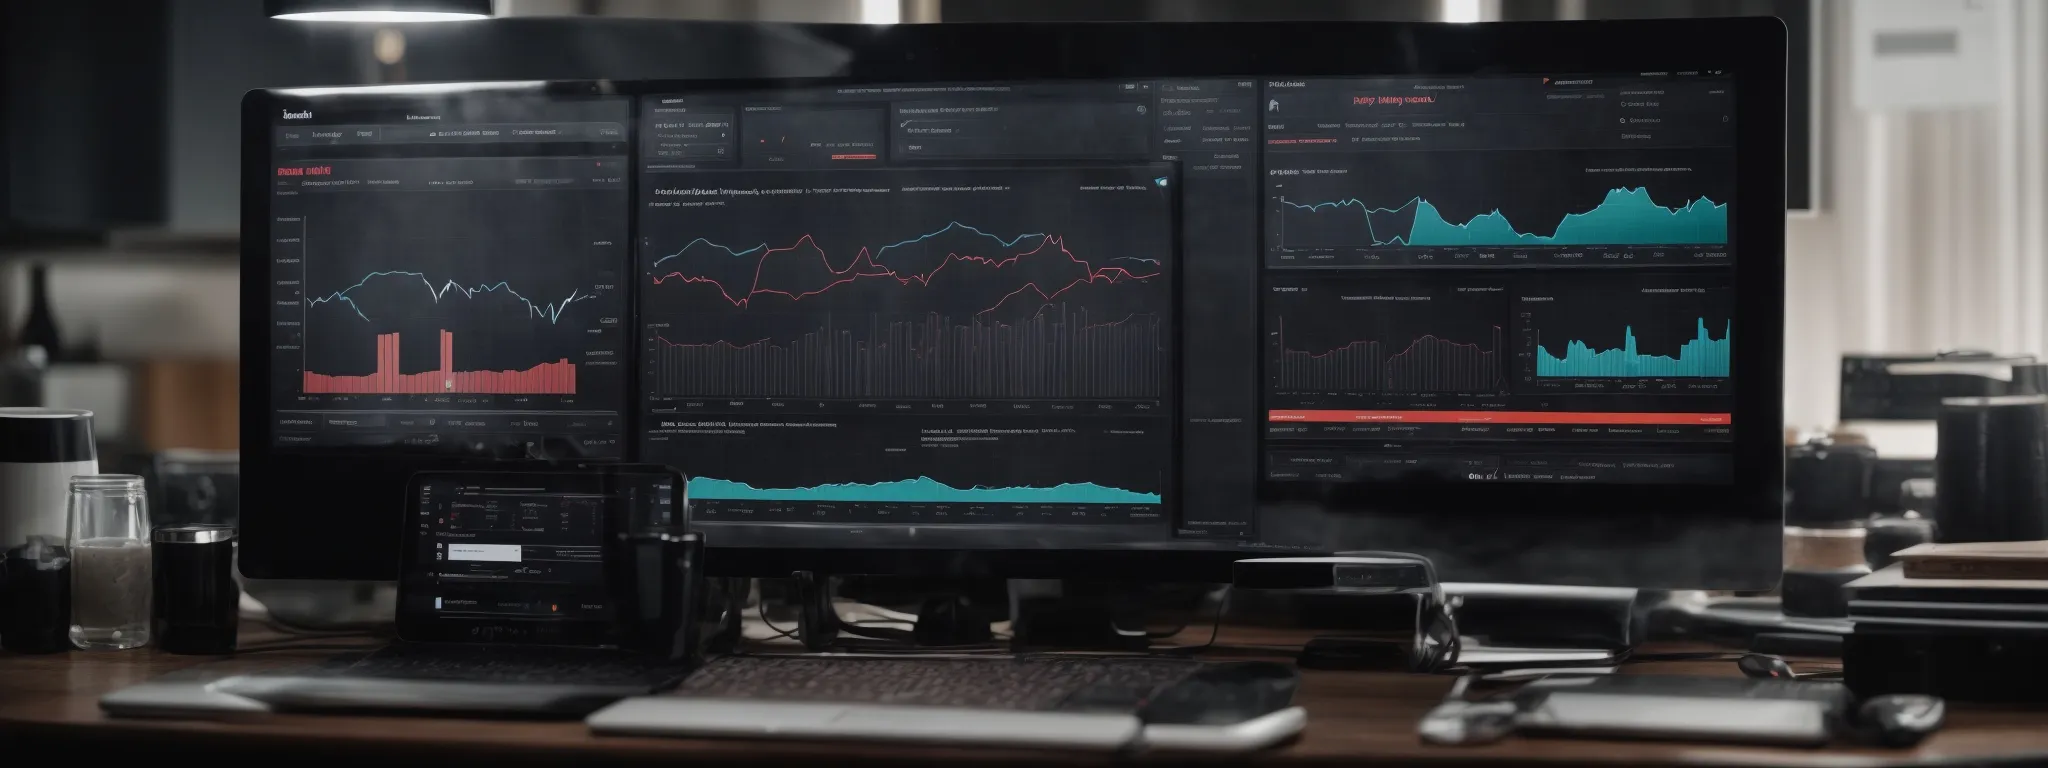 a desktop with multiple open analytics dashboards showing website performance metrics and a digital marketing strategy plan.